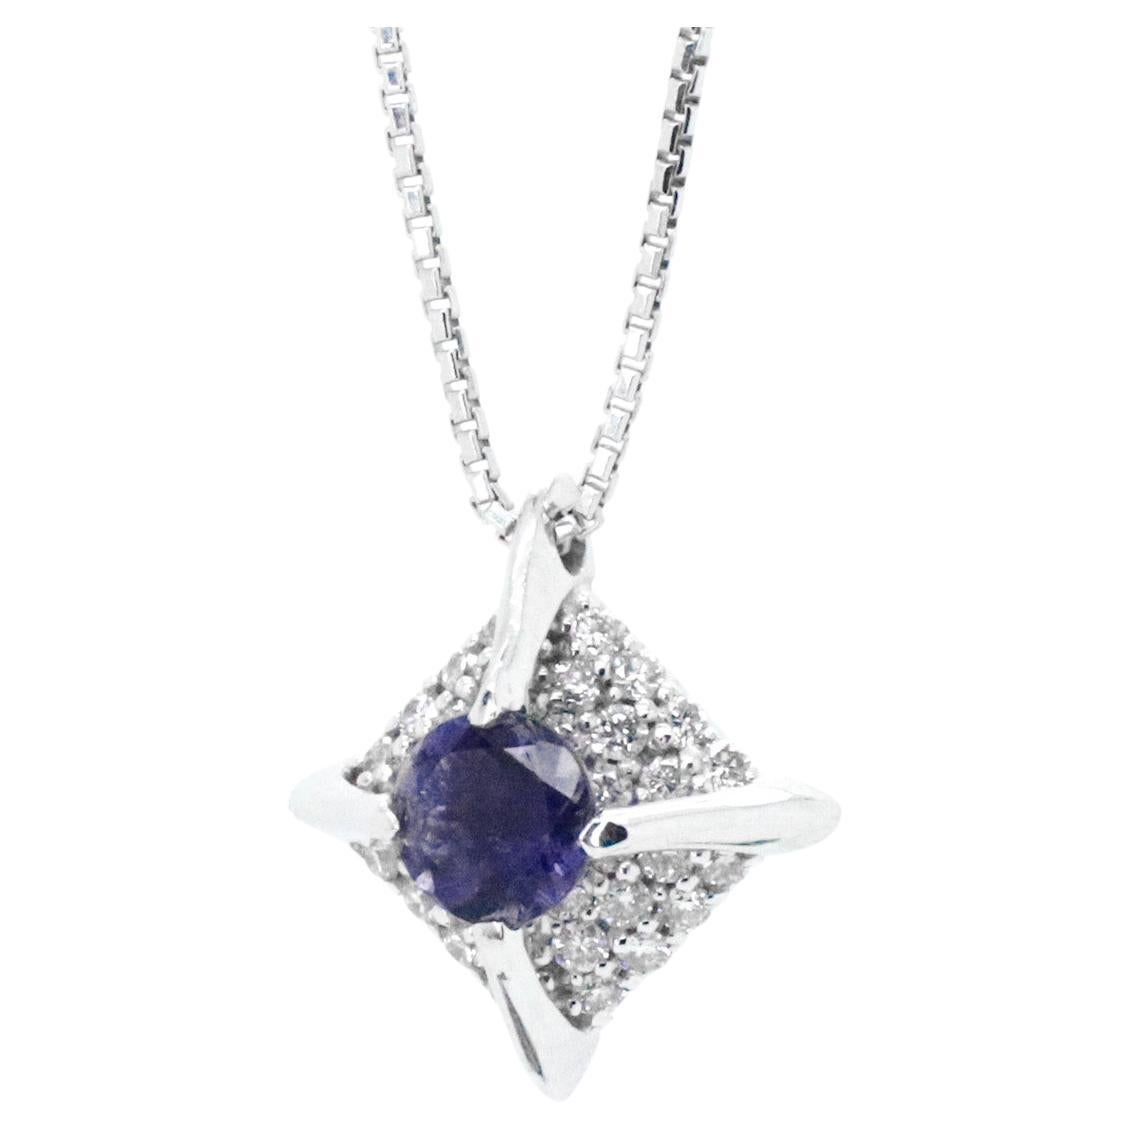 18K white Gold Made in Italy Vogue Awarded Diamond Blue Sapphire Cosmic Pendant.
Unlock Your Divine Potential with the Vega pendant necklace. 
Gems and metal are energetically cleansed to emit their best vibrations.
The Vega pendant necklace is made